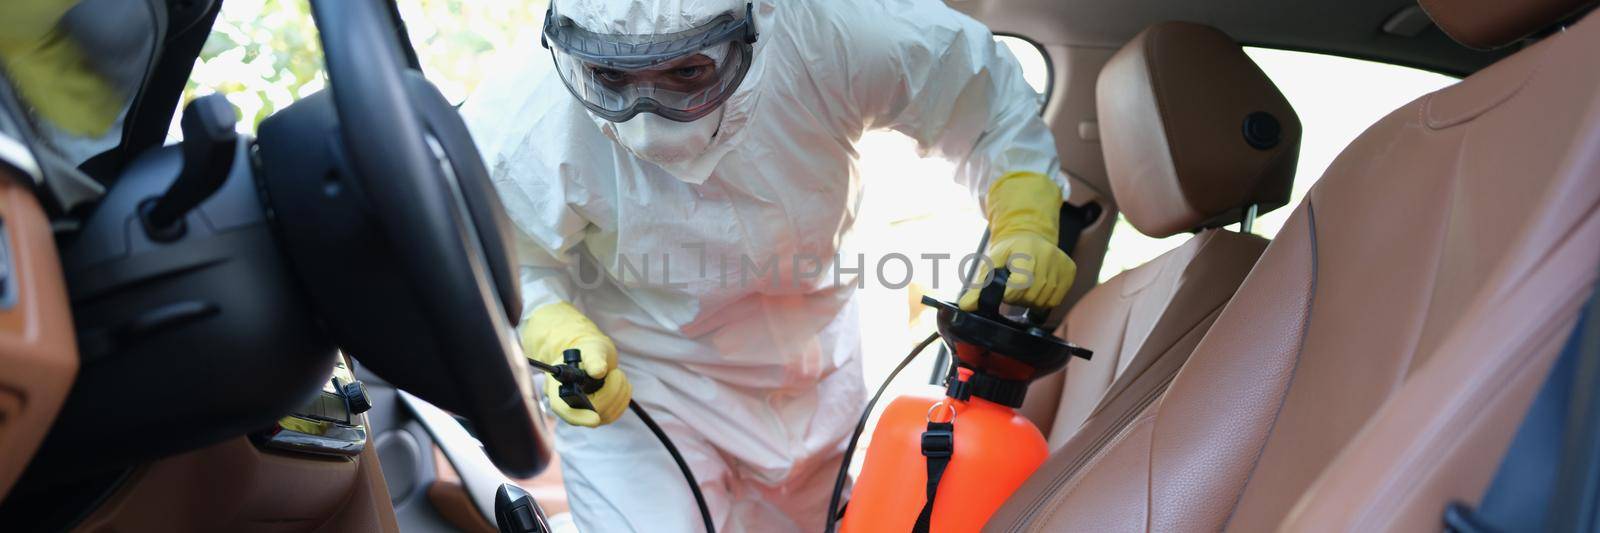 Man in protective suit cleaning car by kuprevich